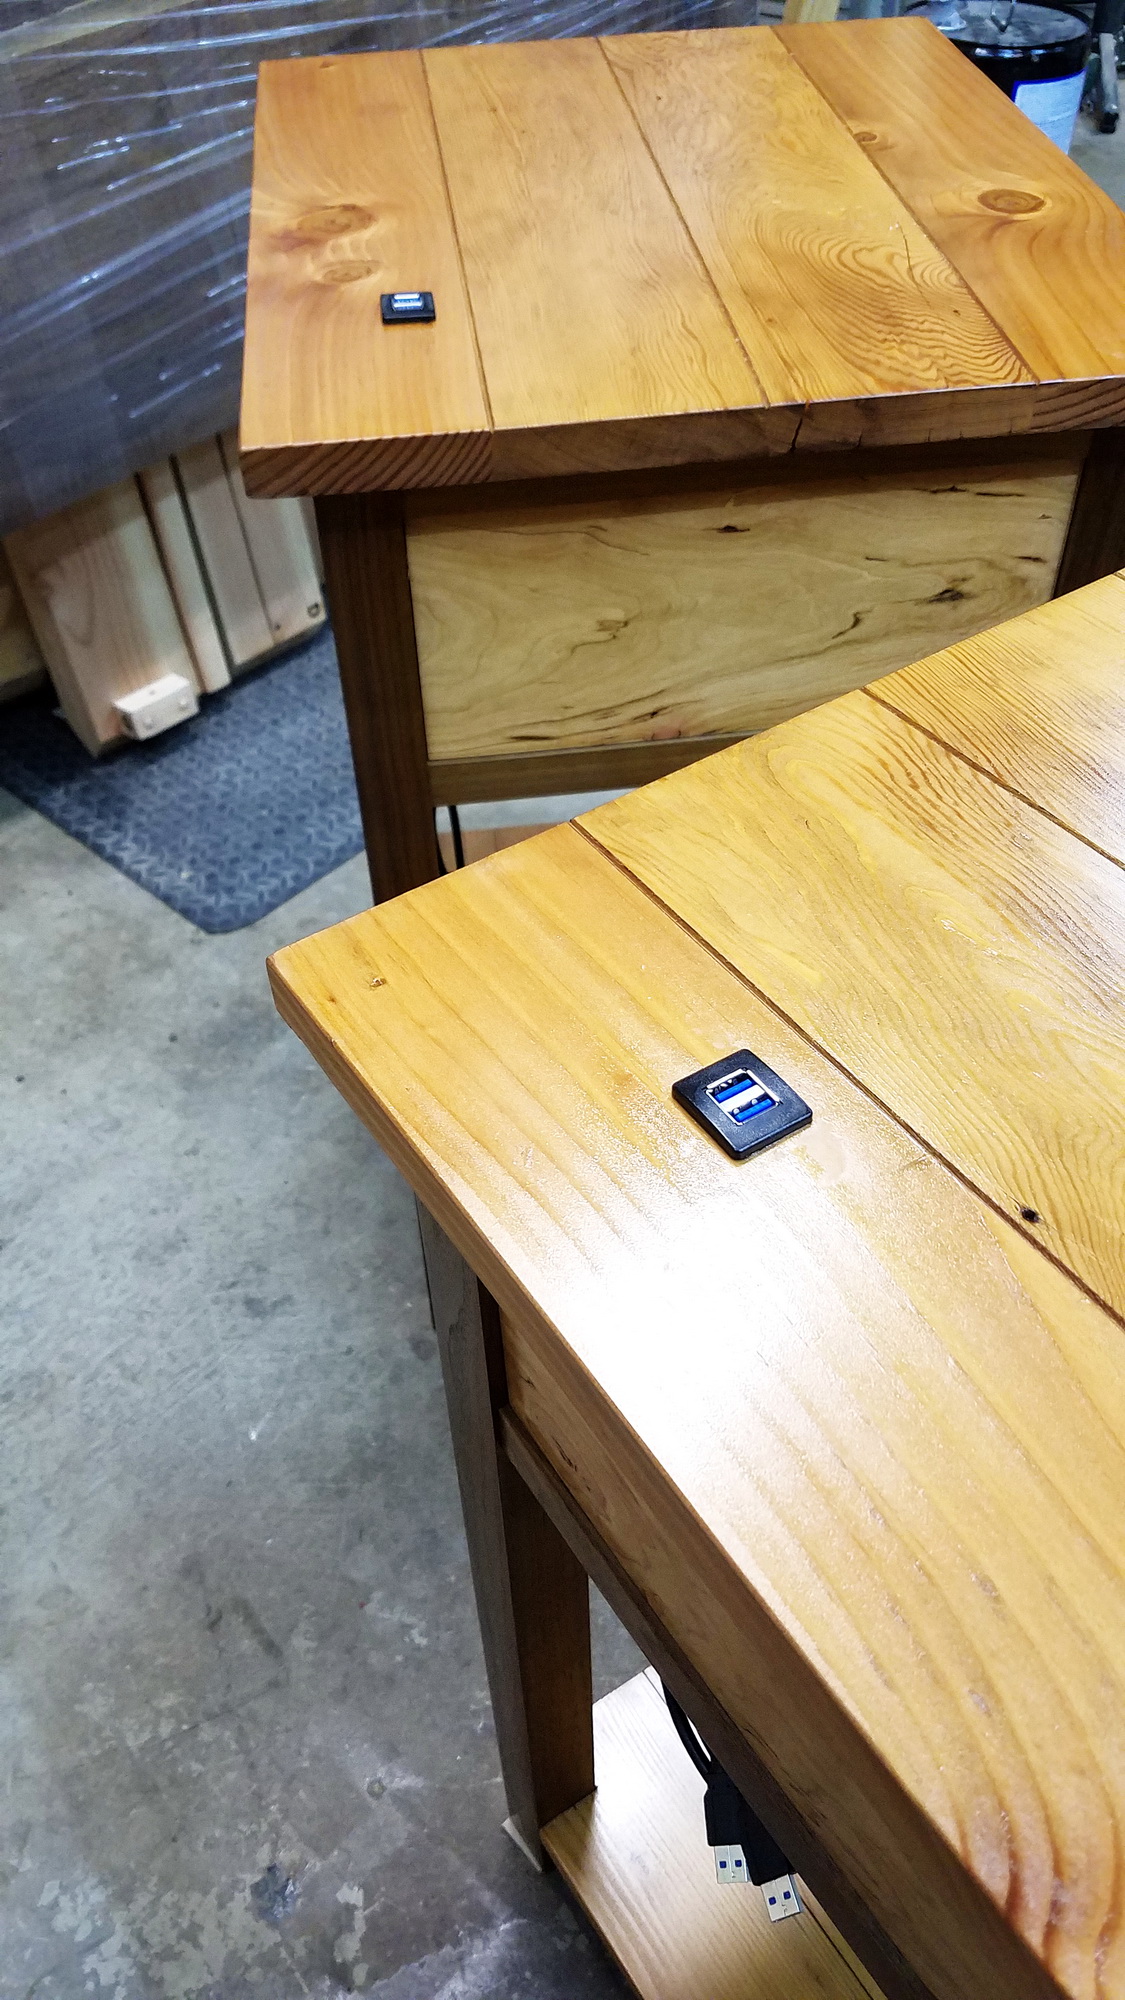 Charging ports on nightstands